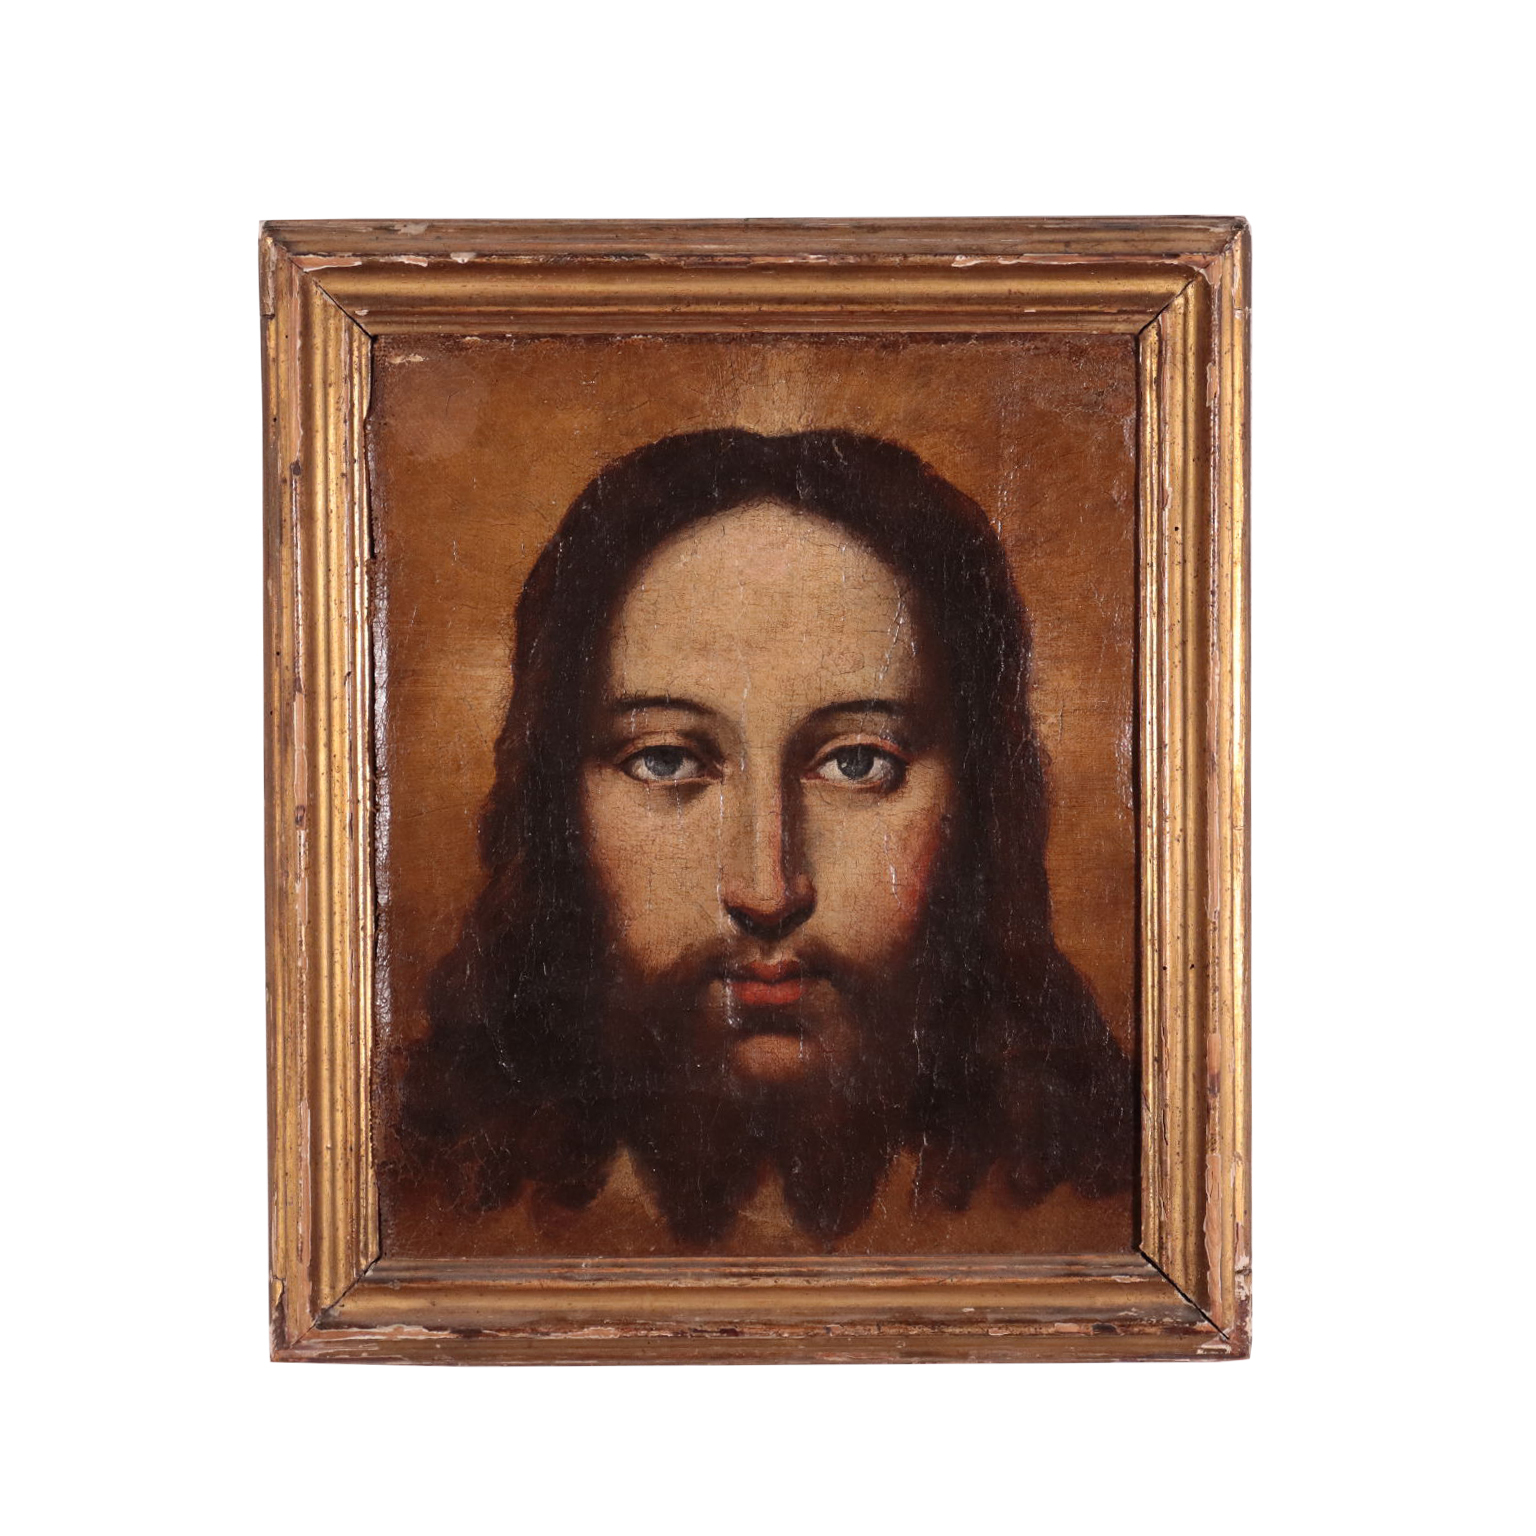 PAINTING THE FACE OF CHRIST, Art, Antique Painting, dimanoinmano.it